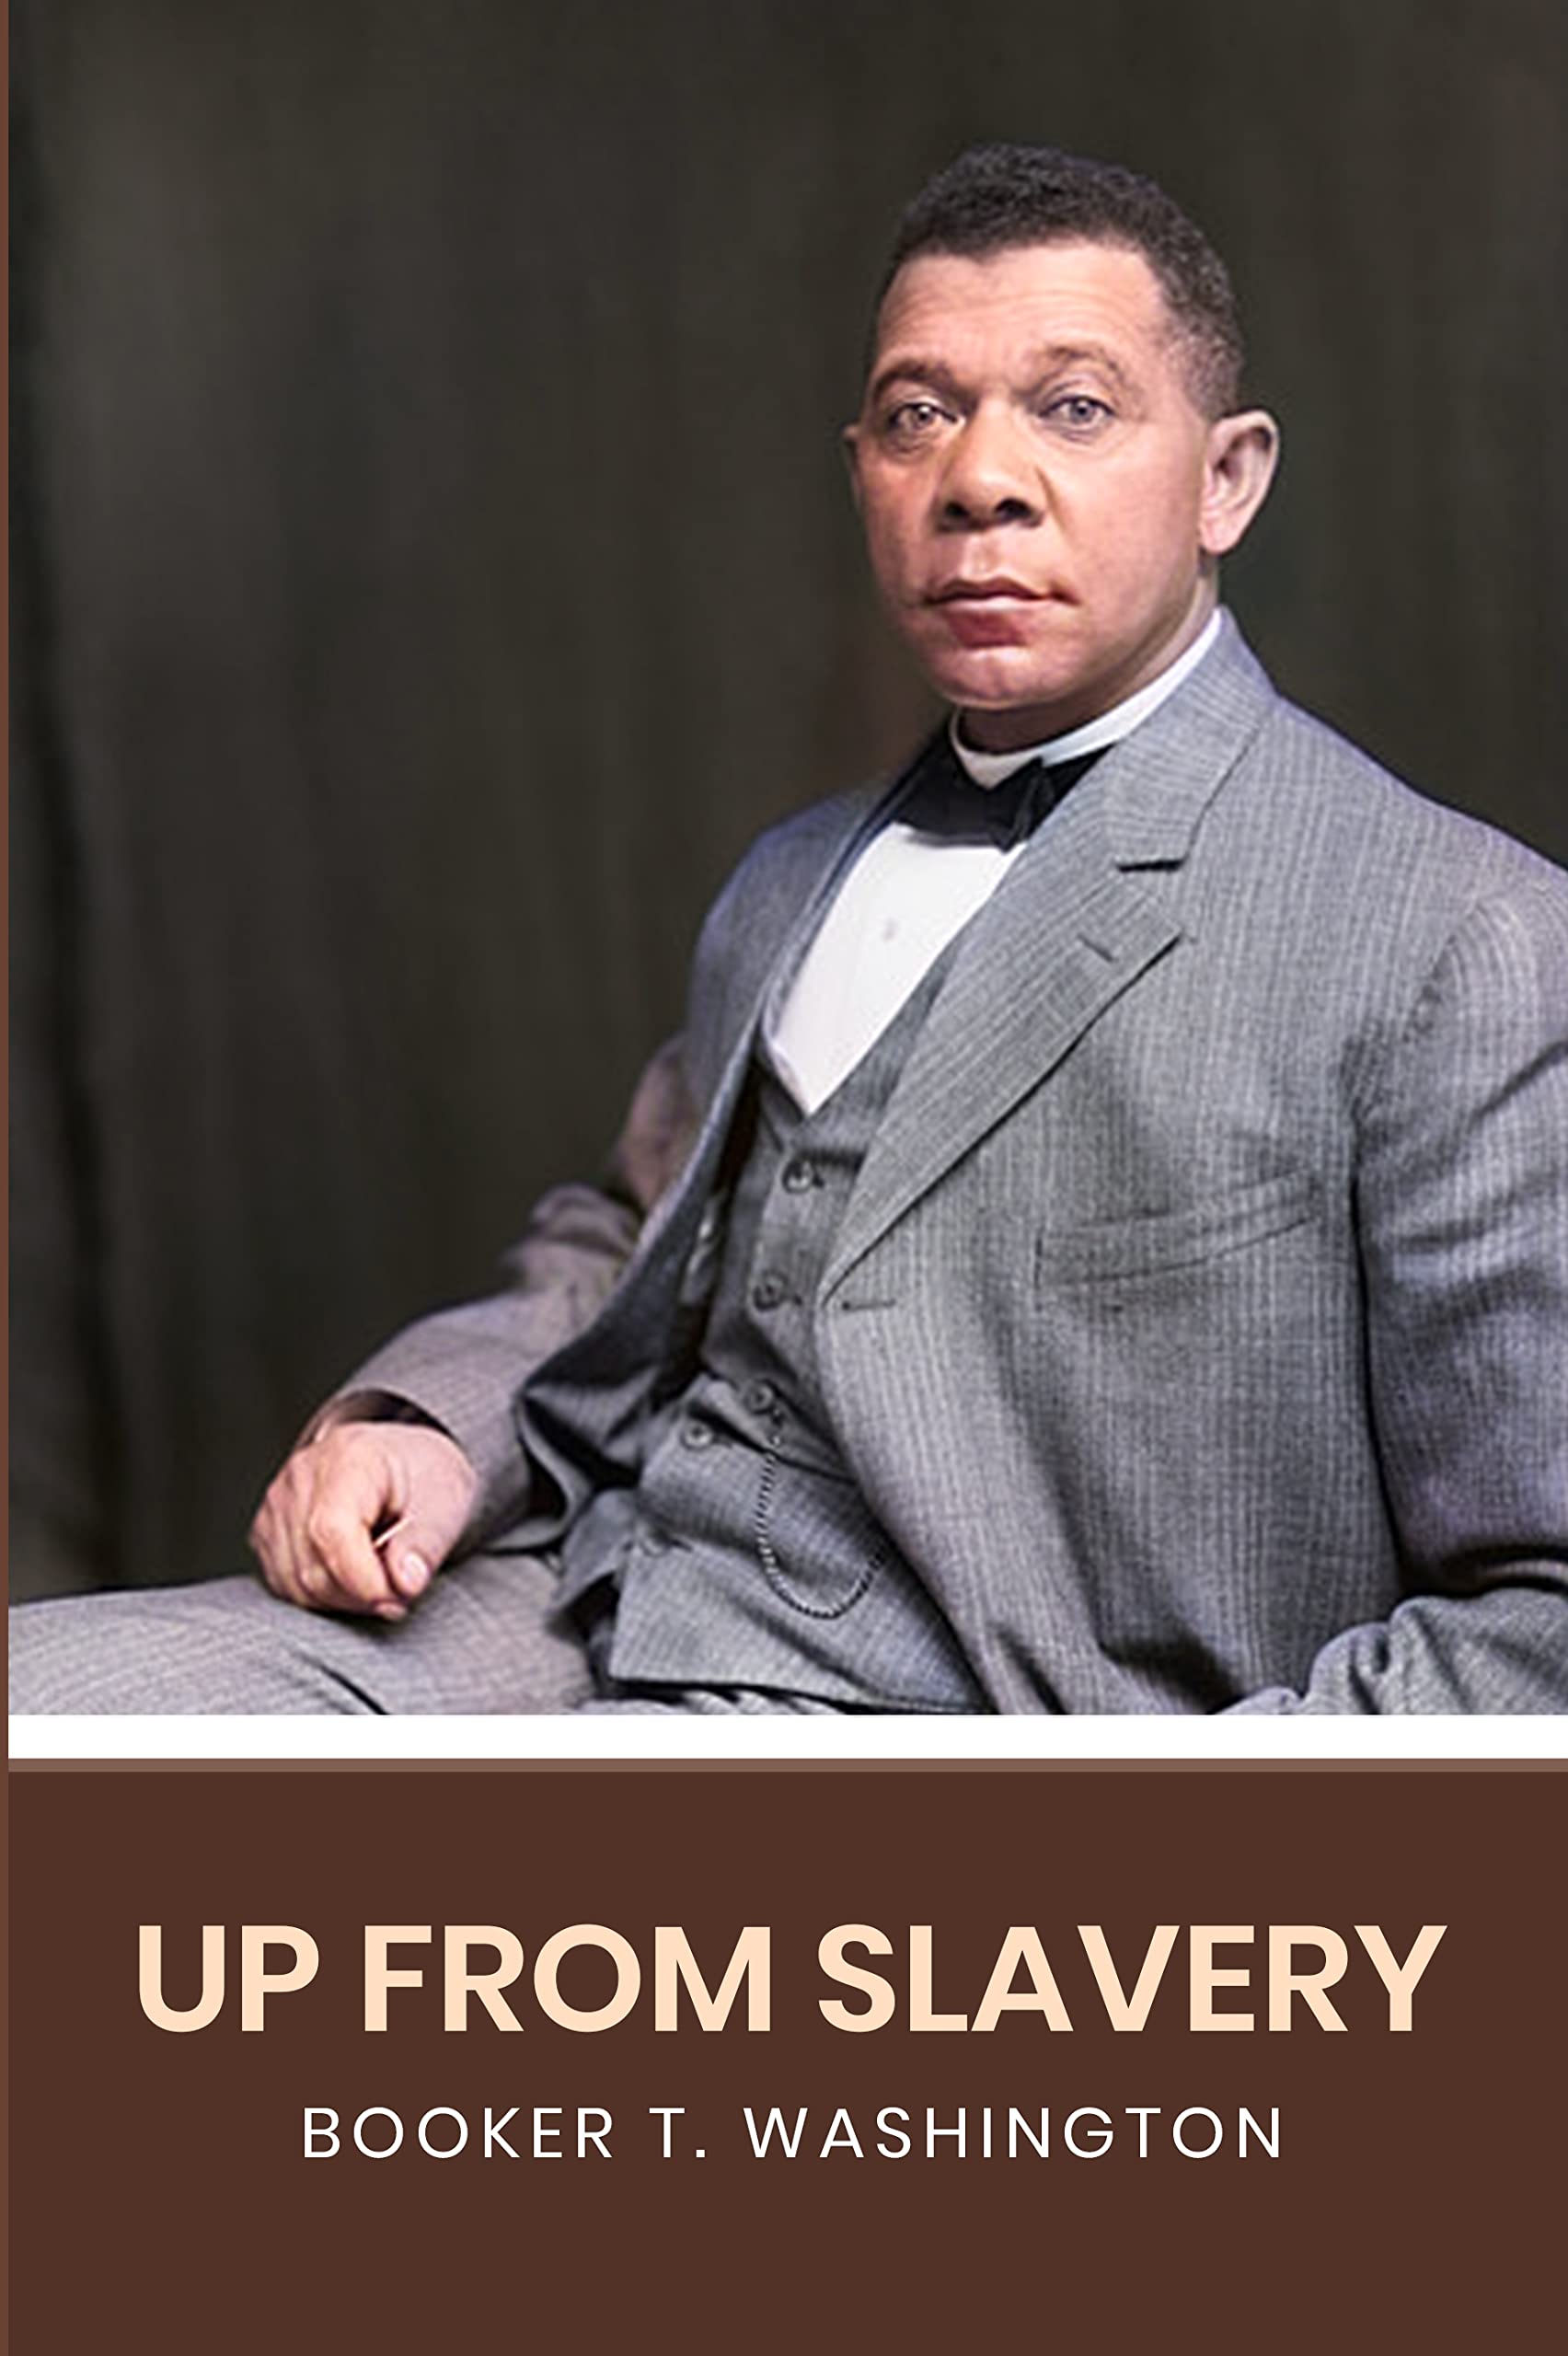 Up From Slavery: The Original 1901 Edition (A Booker T. Washington Classics)